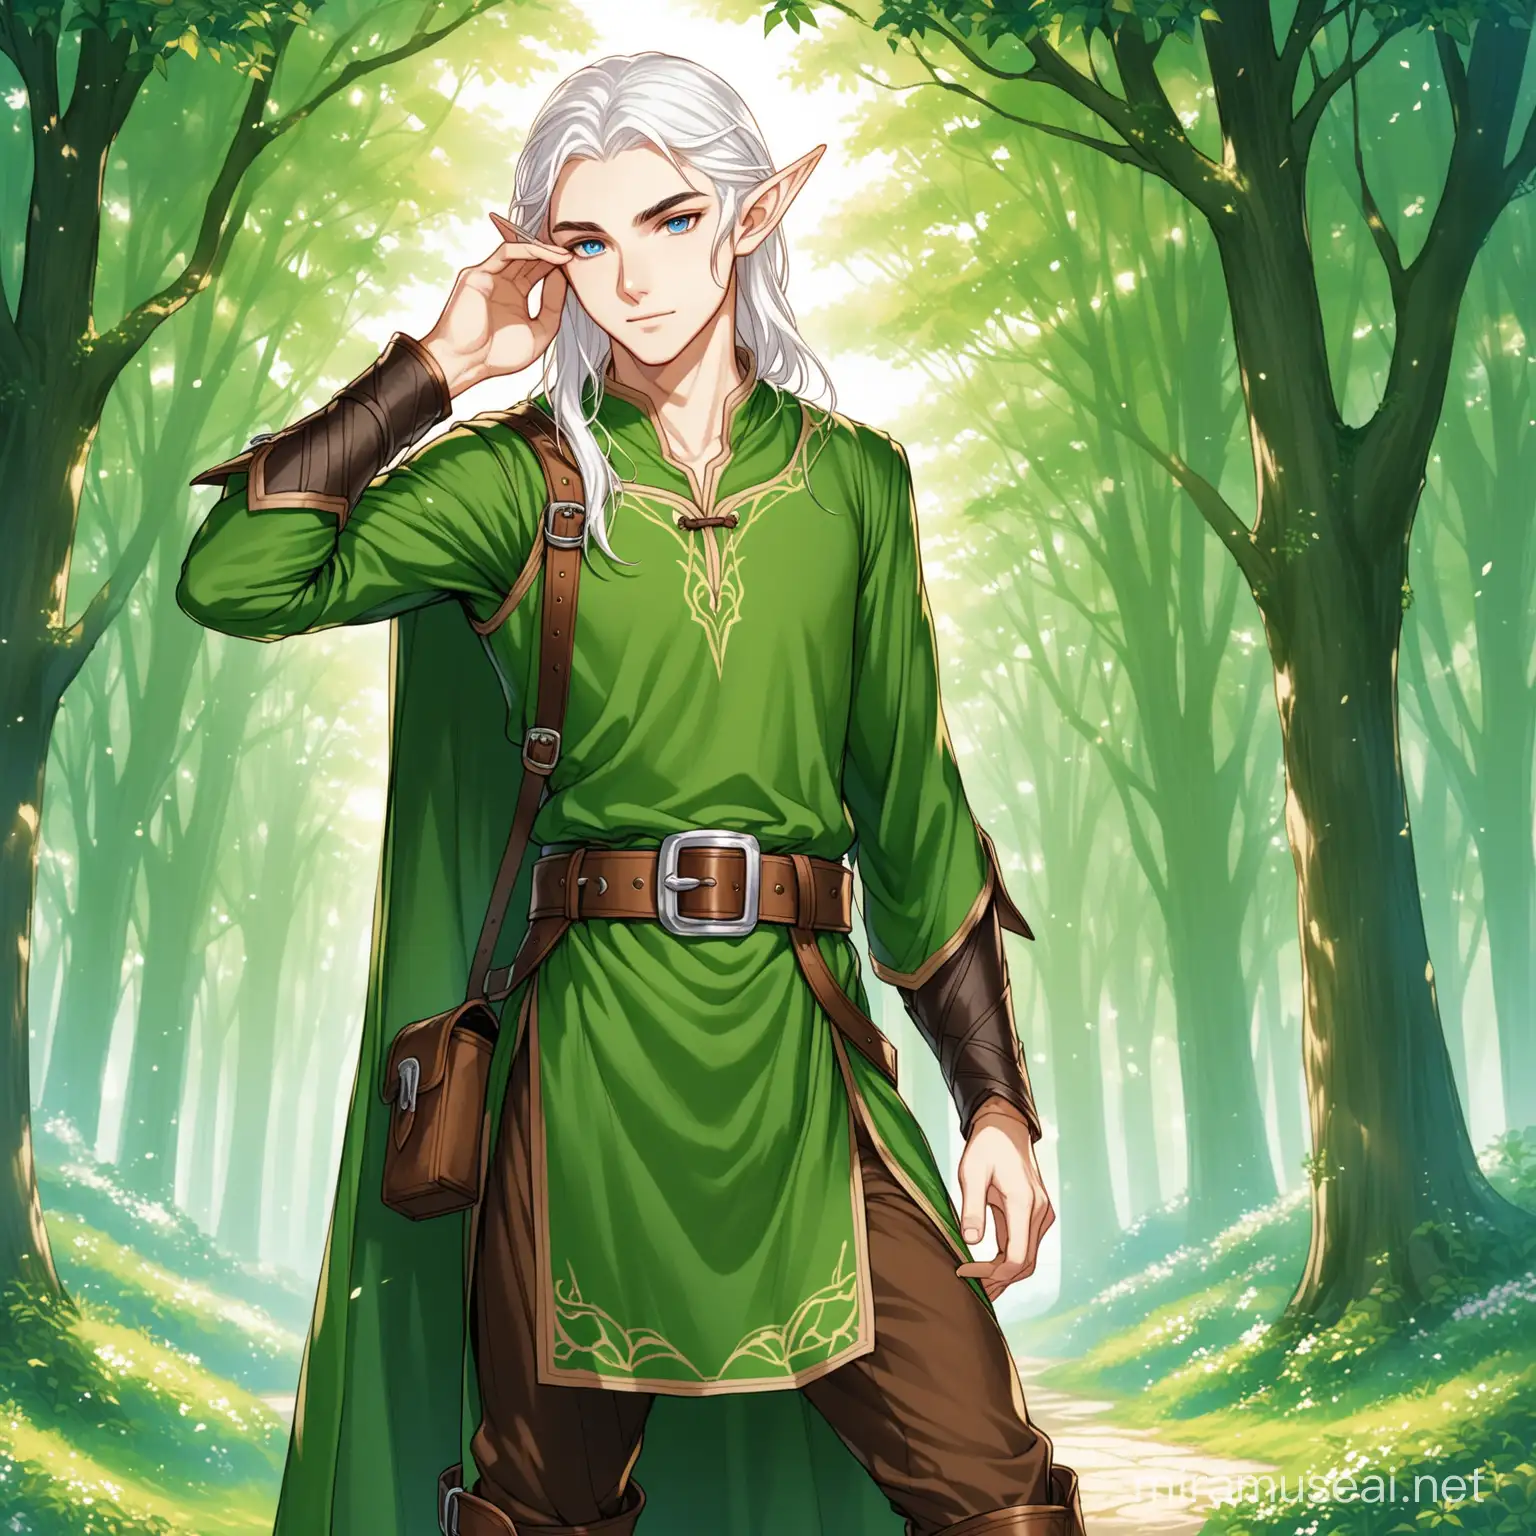 male tolkein elf, green and brown tunic, knee high boots, belts and buckles, hand over brow, long white hair, blue eyes, fair skin, tall, thin